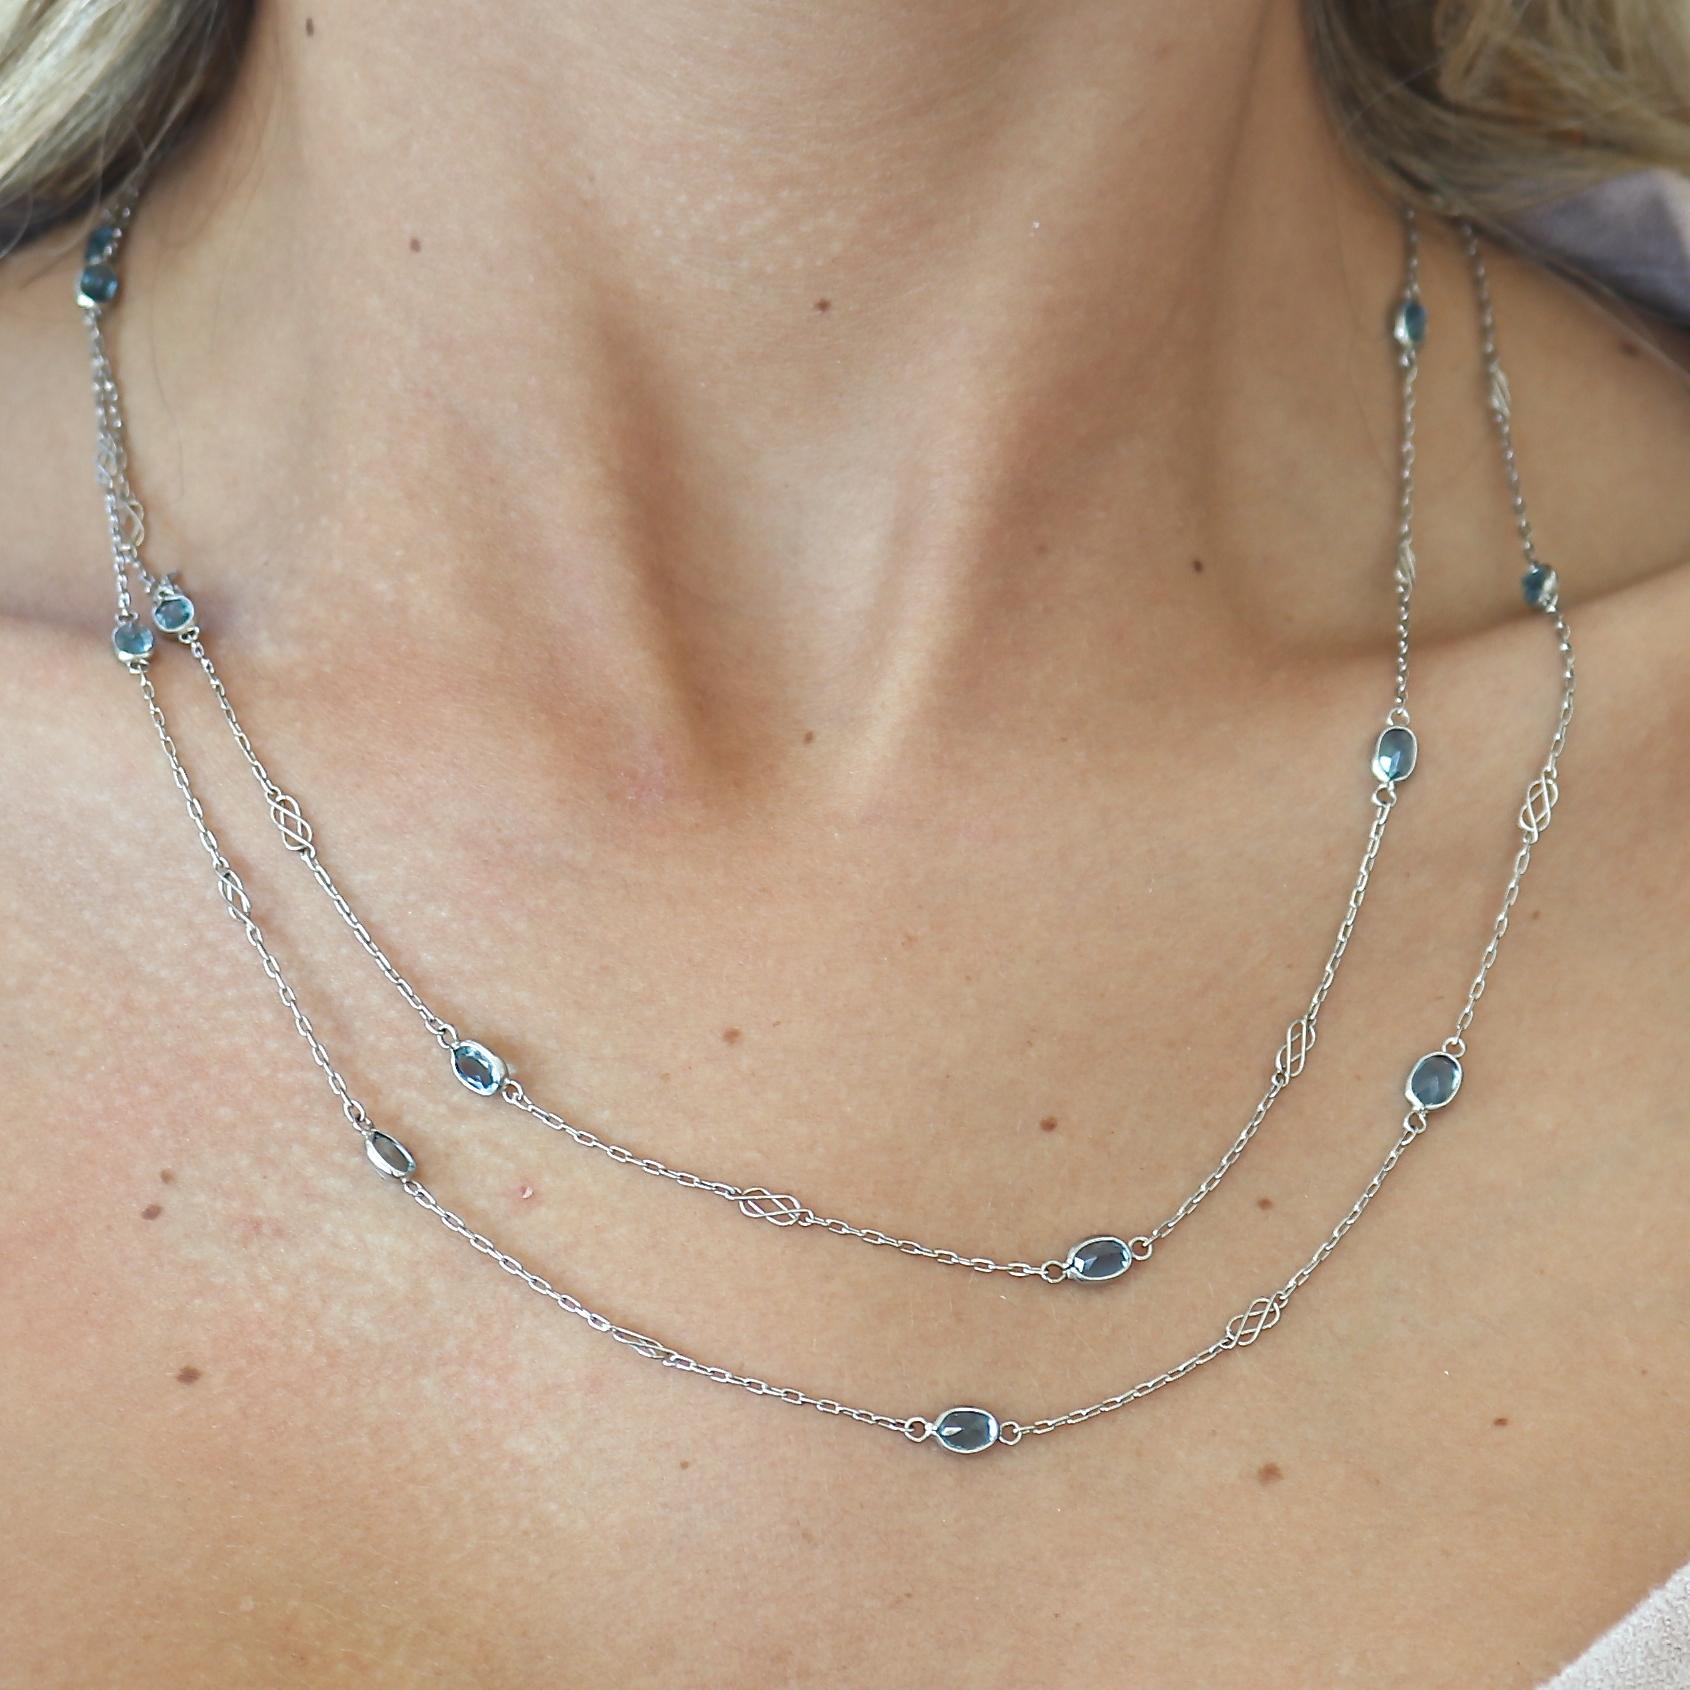 A subtle elegance that is unique and perfect in every way. Featuring numerous colorful aquamarines that are each bezel set in the delicate platinum chain. 40 inches long.